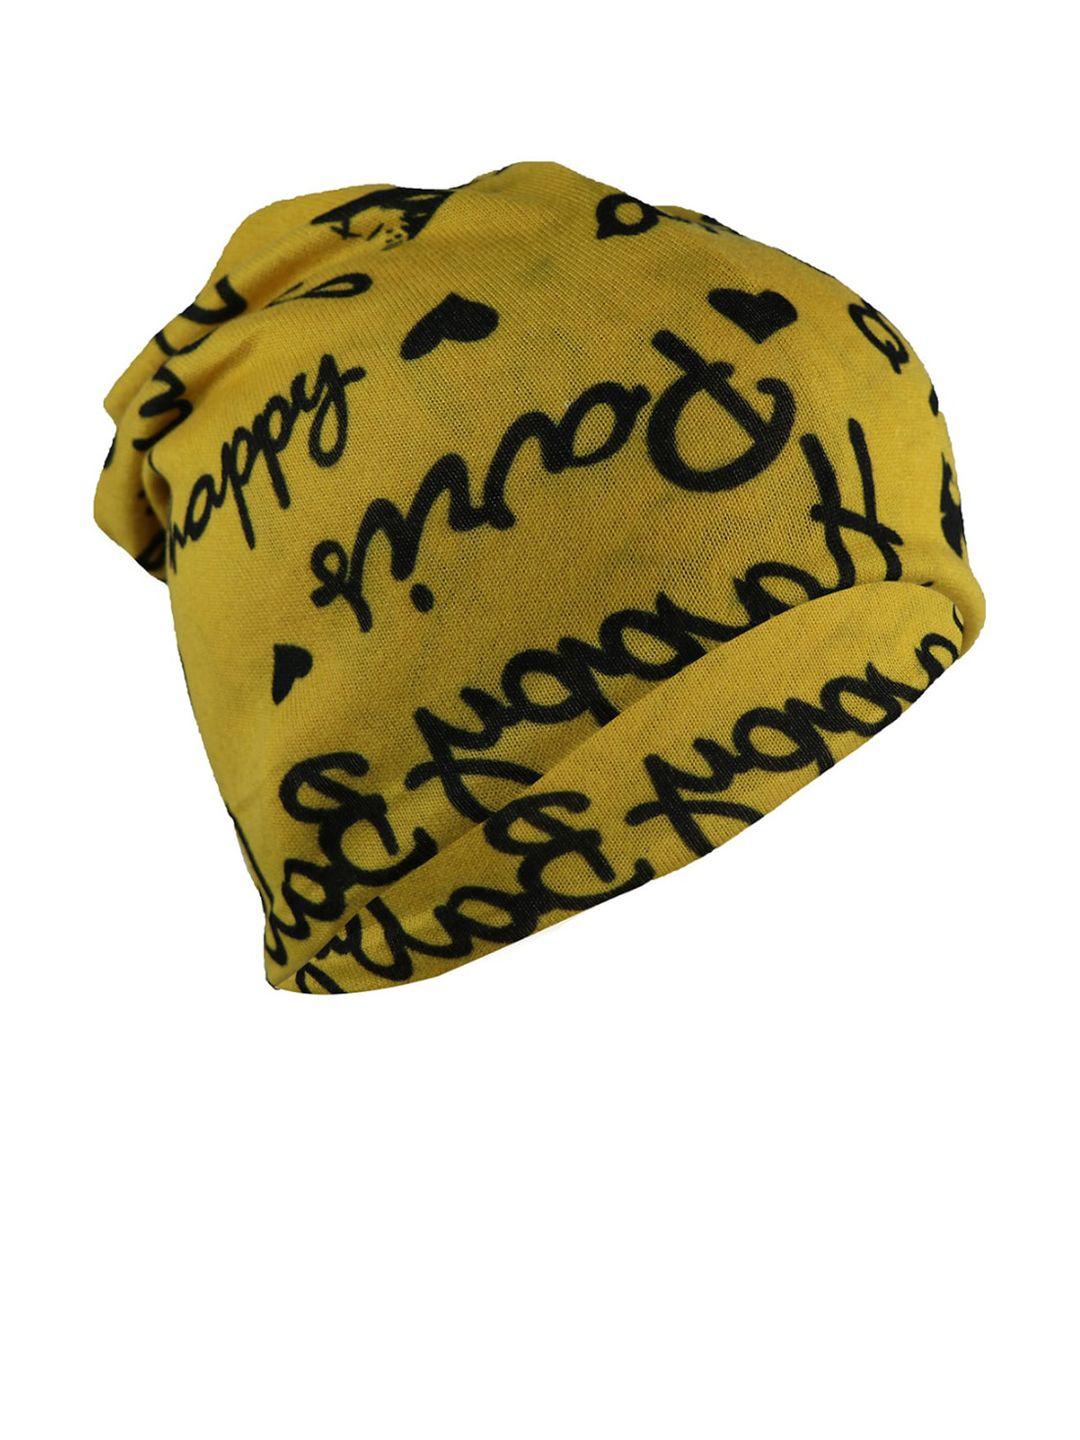 isweven unisex yellow & black printed beanie